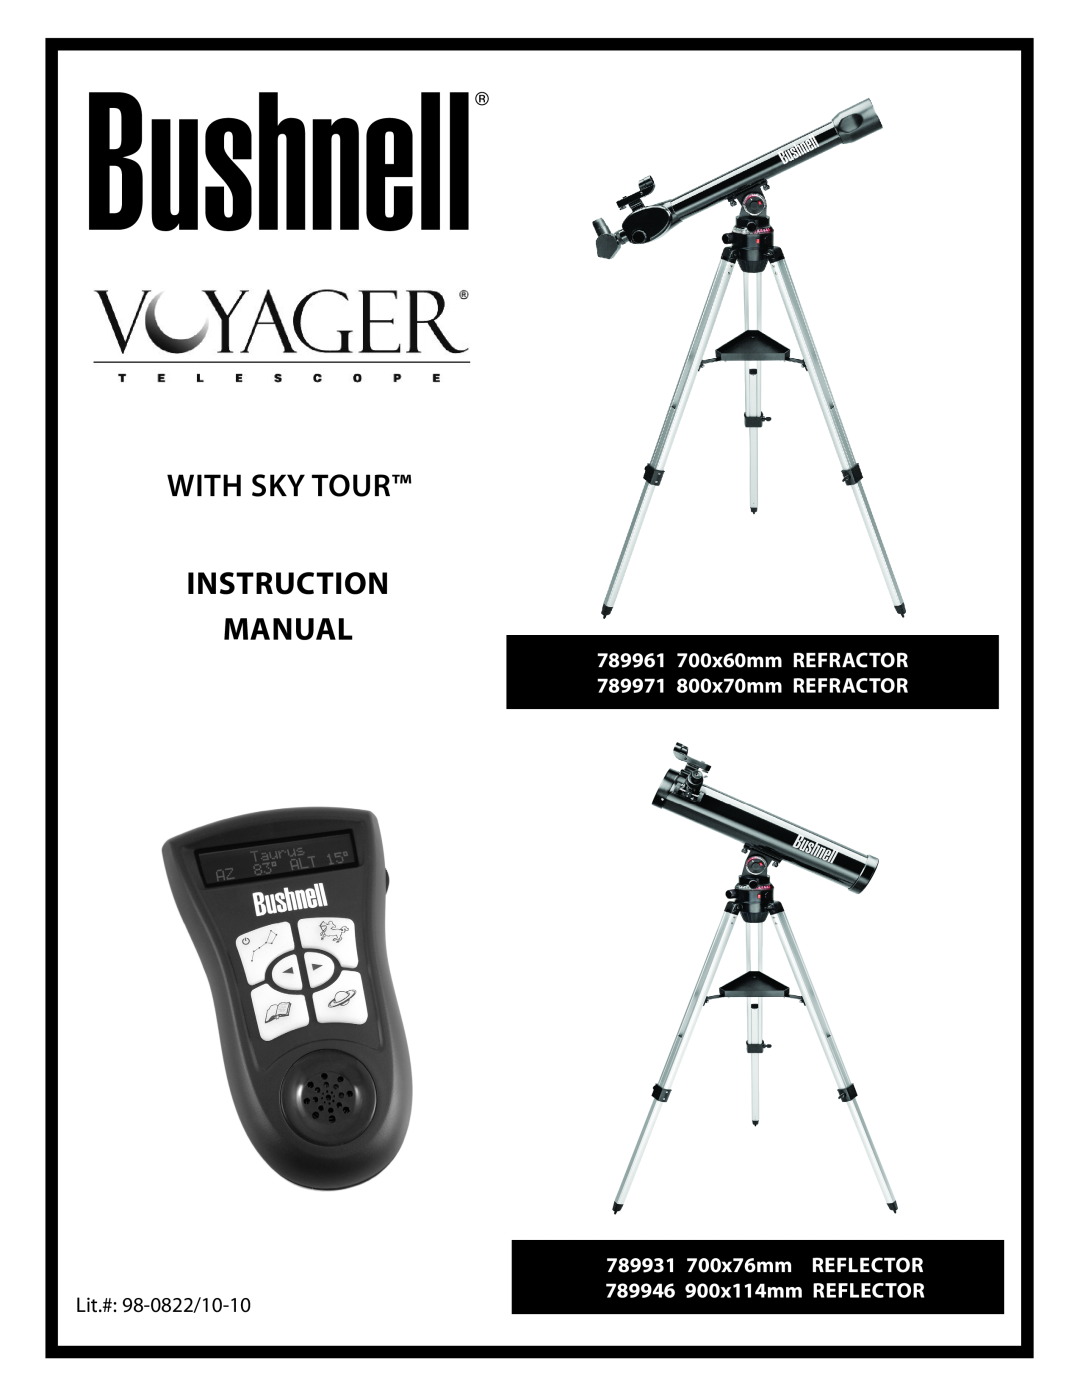 Bushnell instruction manual With sky tour Instruction Manual, 789961 700x60mm refractor 789971 800x70mm refractor 